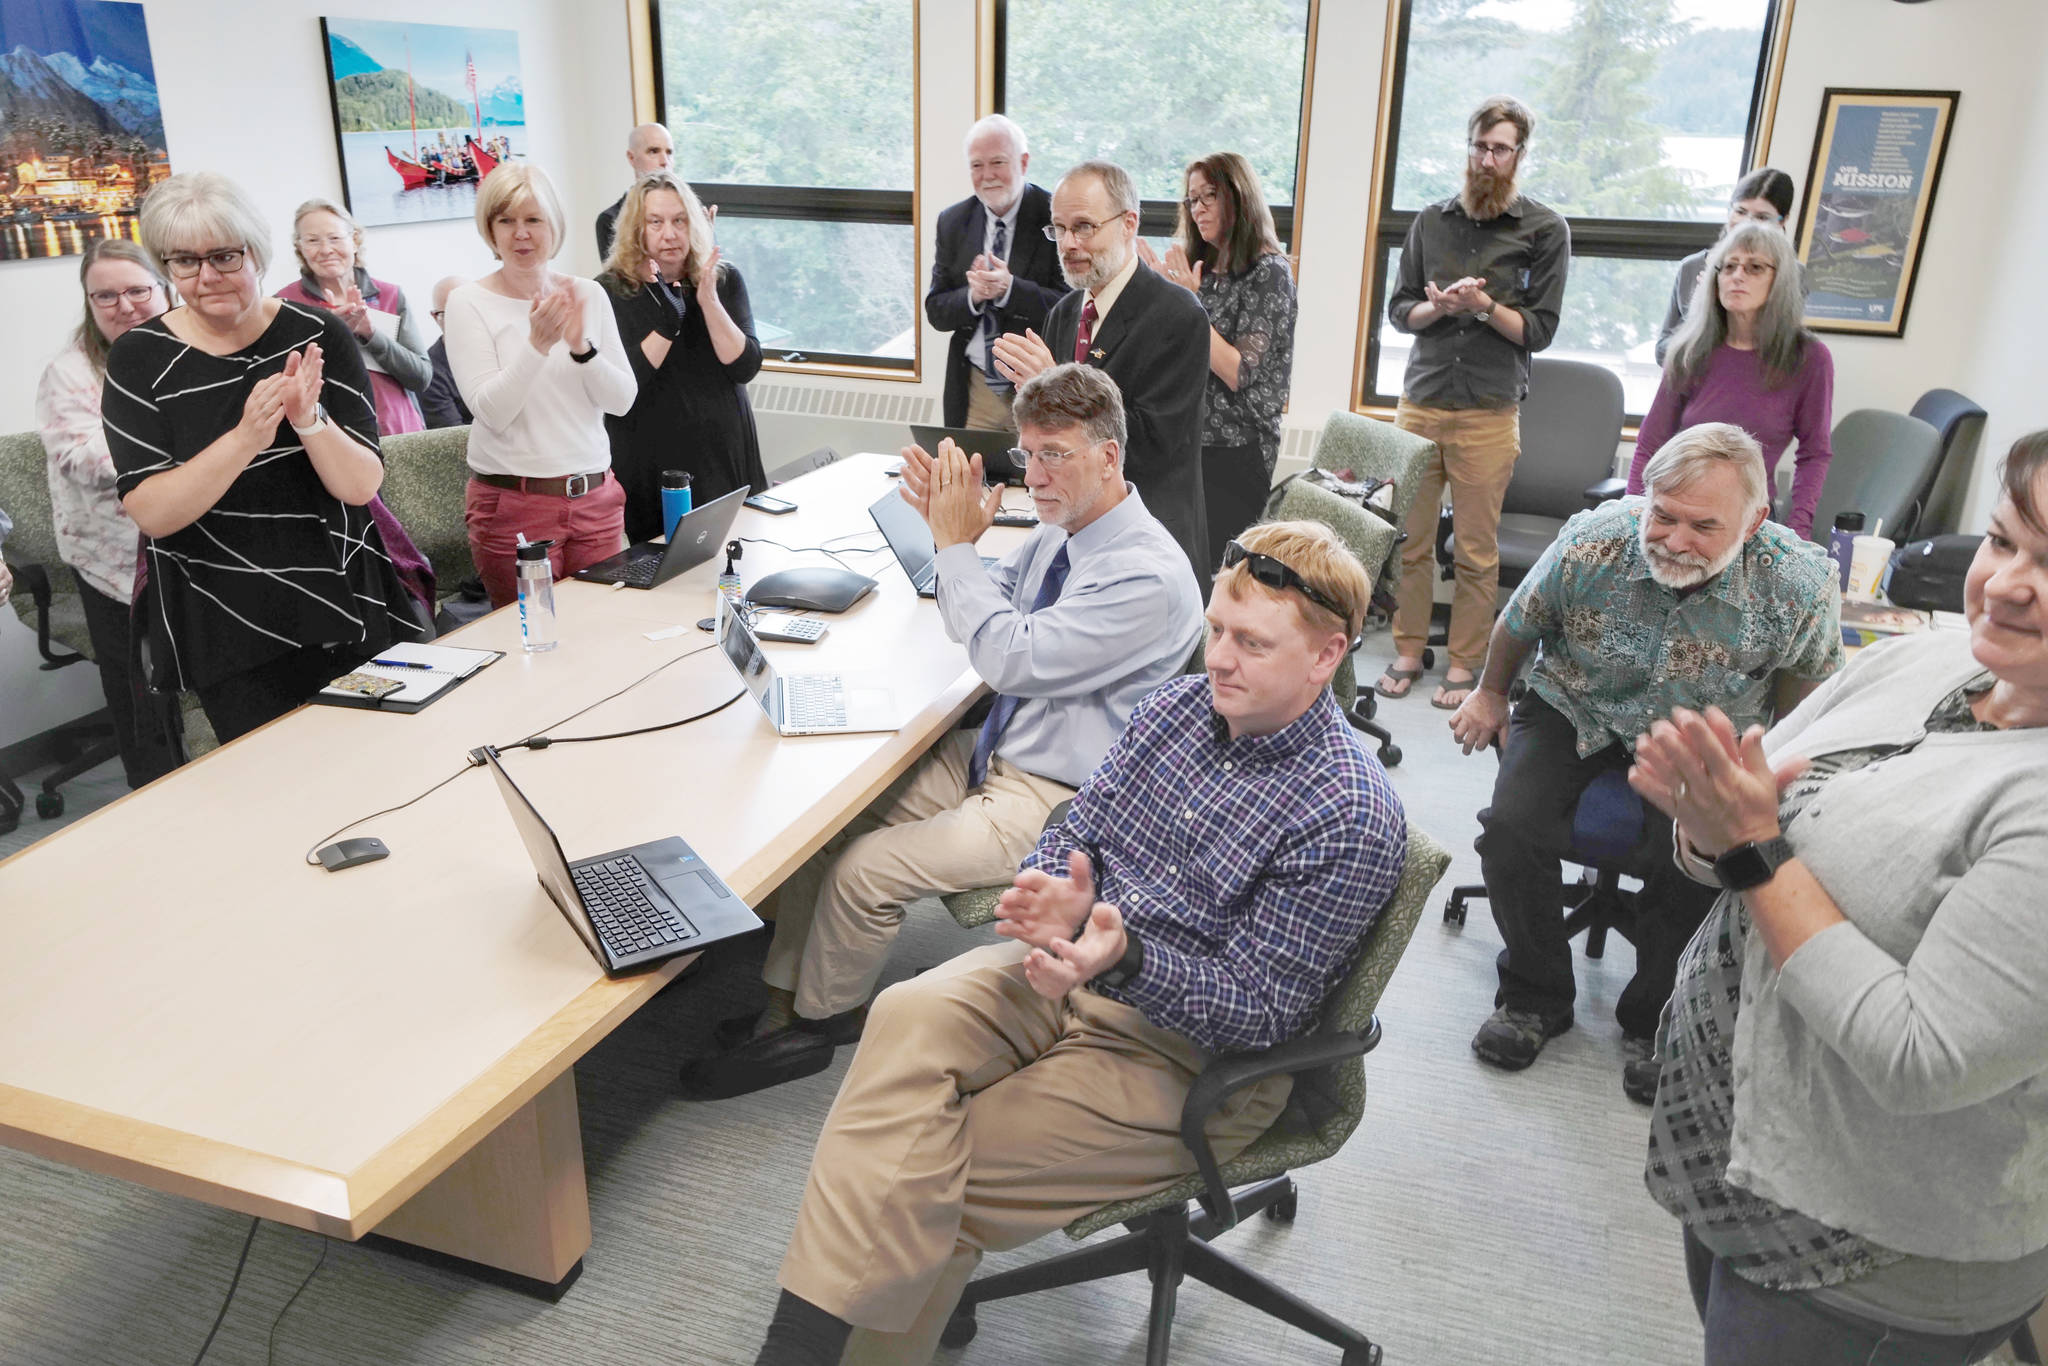 Michael Penn | Juneau Empire                                University of Alaska Southeast administrators and staff applaud a speech by Sen. Click Bishop, R-Fairbanks, as they watch an online meeting being held Monday at UA campuses around the state on Gov. Mike Dunleavy’s budget cuts.